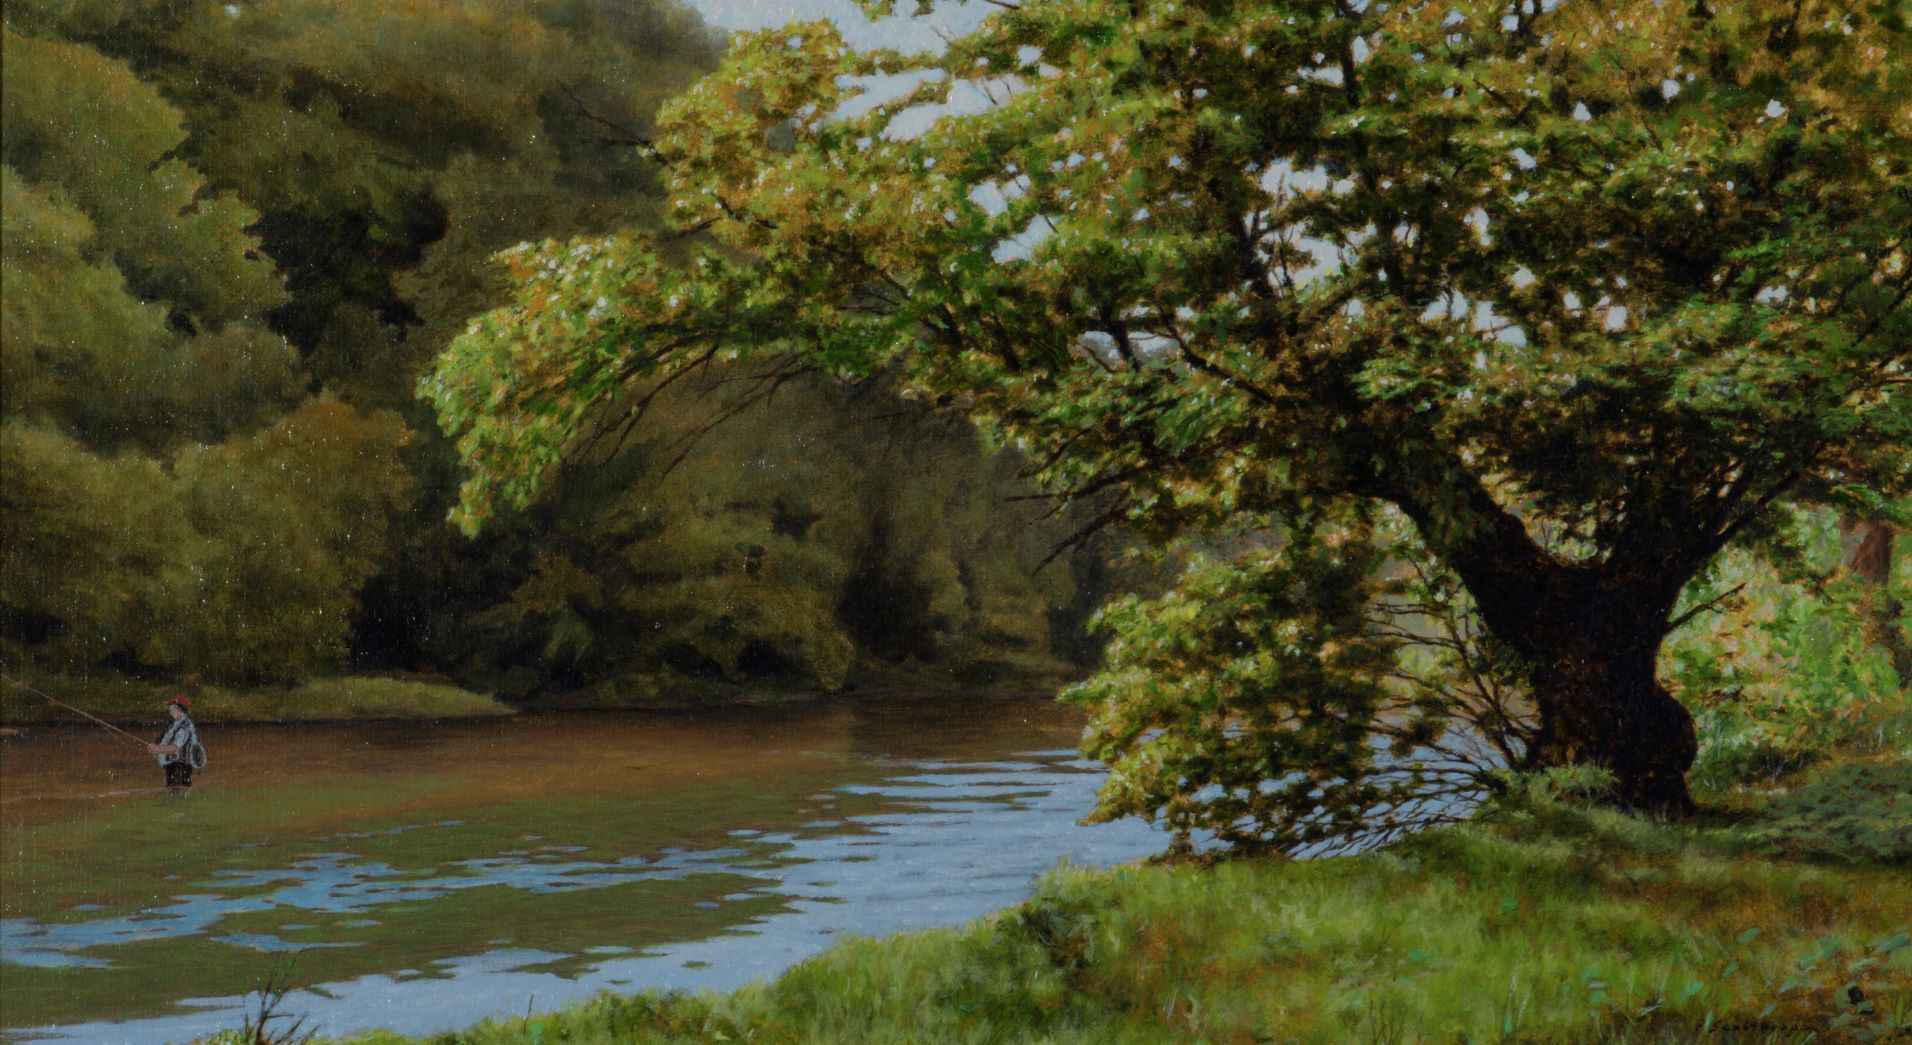 Late Summer Shallows by  Peter Sculthorpe - Masterpiece Online